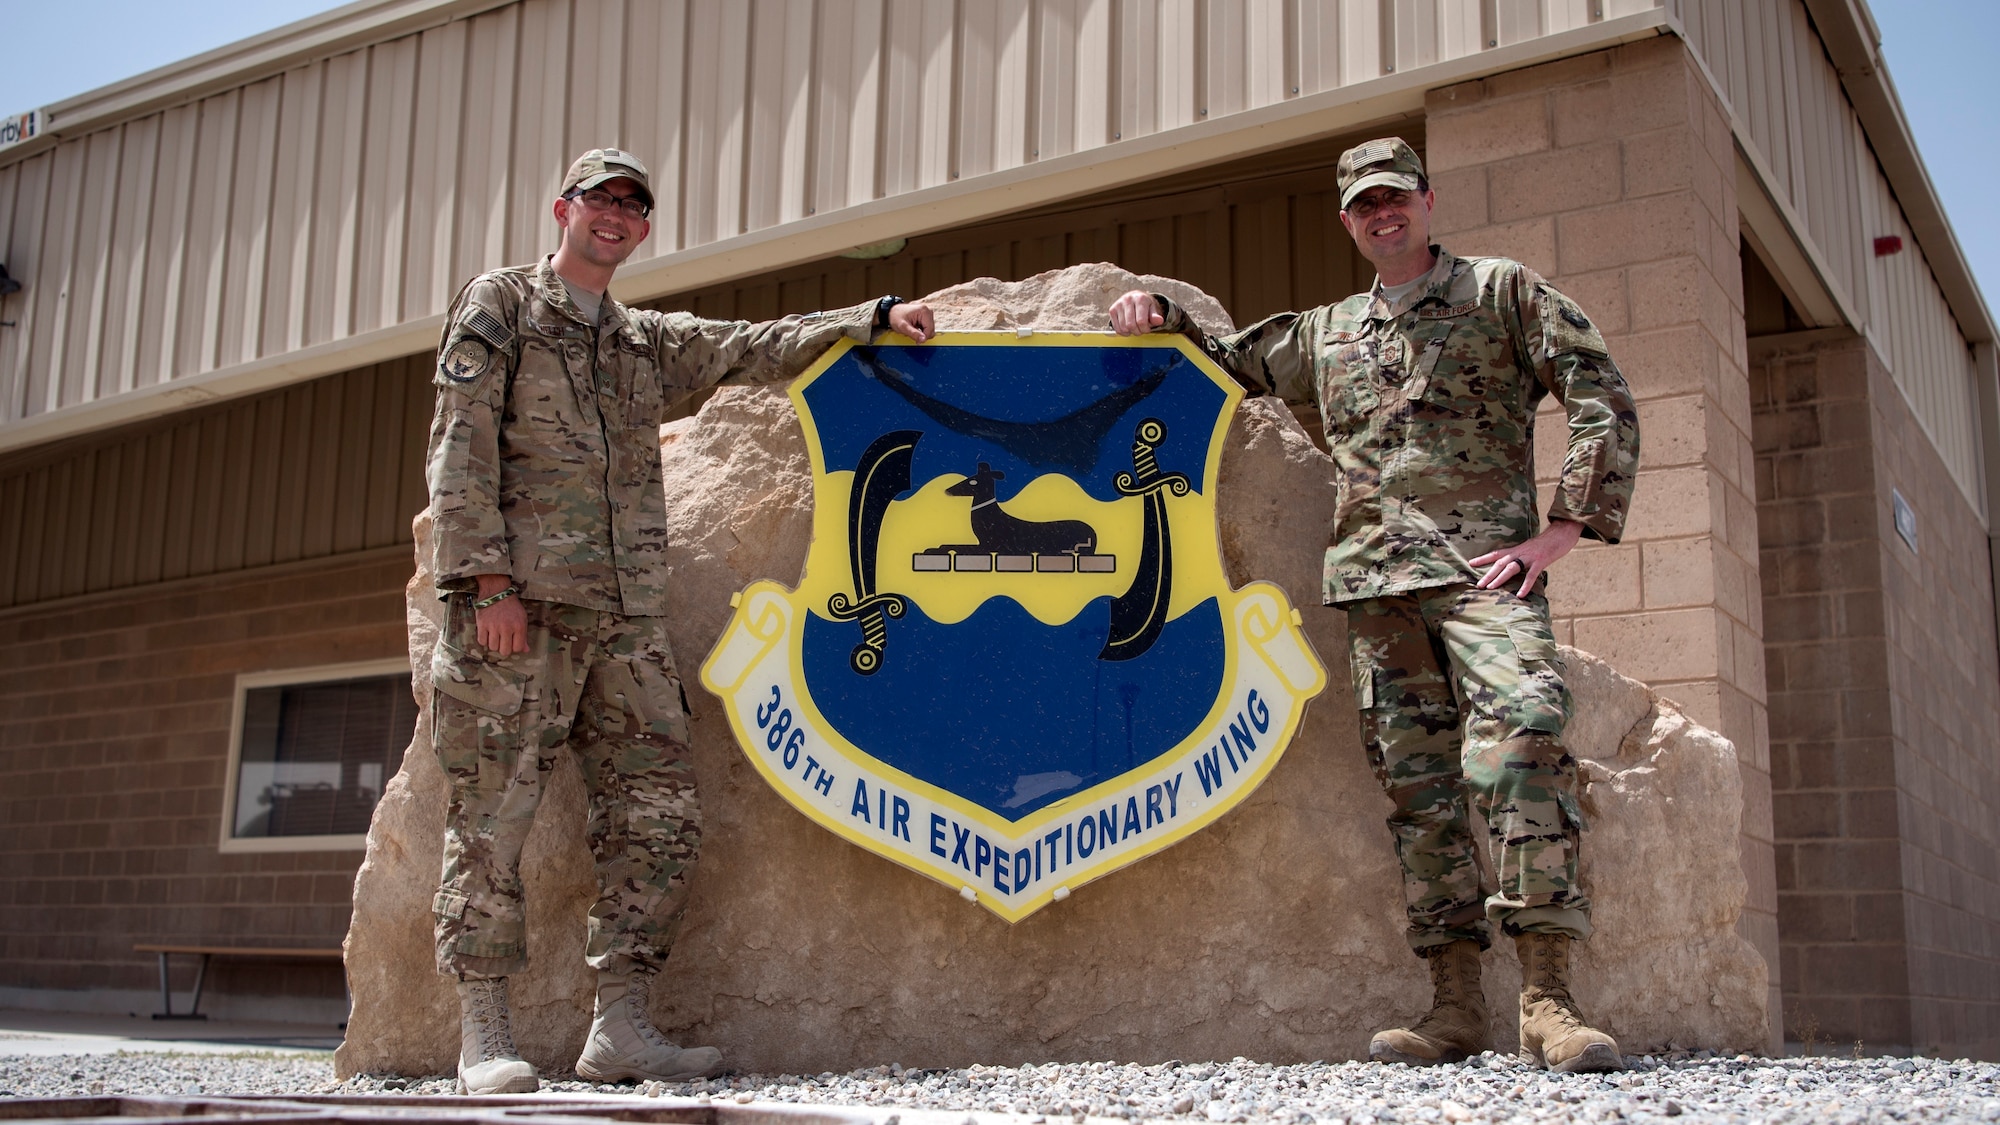 Staff Sgt. Kevin Welch, 386th Expeditionary Civil Engineer Squadron project manager, and Chief Master Sgt. Chad Welch, 386th Air Expeditionary Wing command chief, pose for a photo June 12, 2018, at an undisclosed location in Southwest Asia. The father and son serve as reservists for the 932nd Airlift Wing at Scott Air Force Base, Ill. (U.S. Air Force photo by Staff Sgt. Christopher Stoltz)